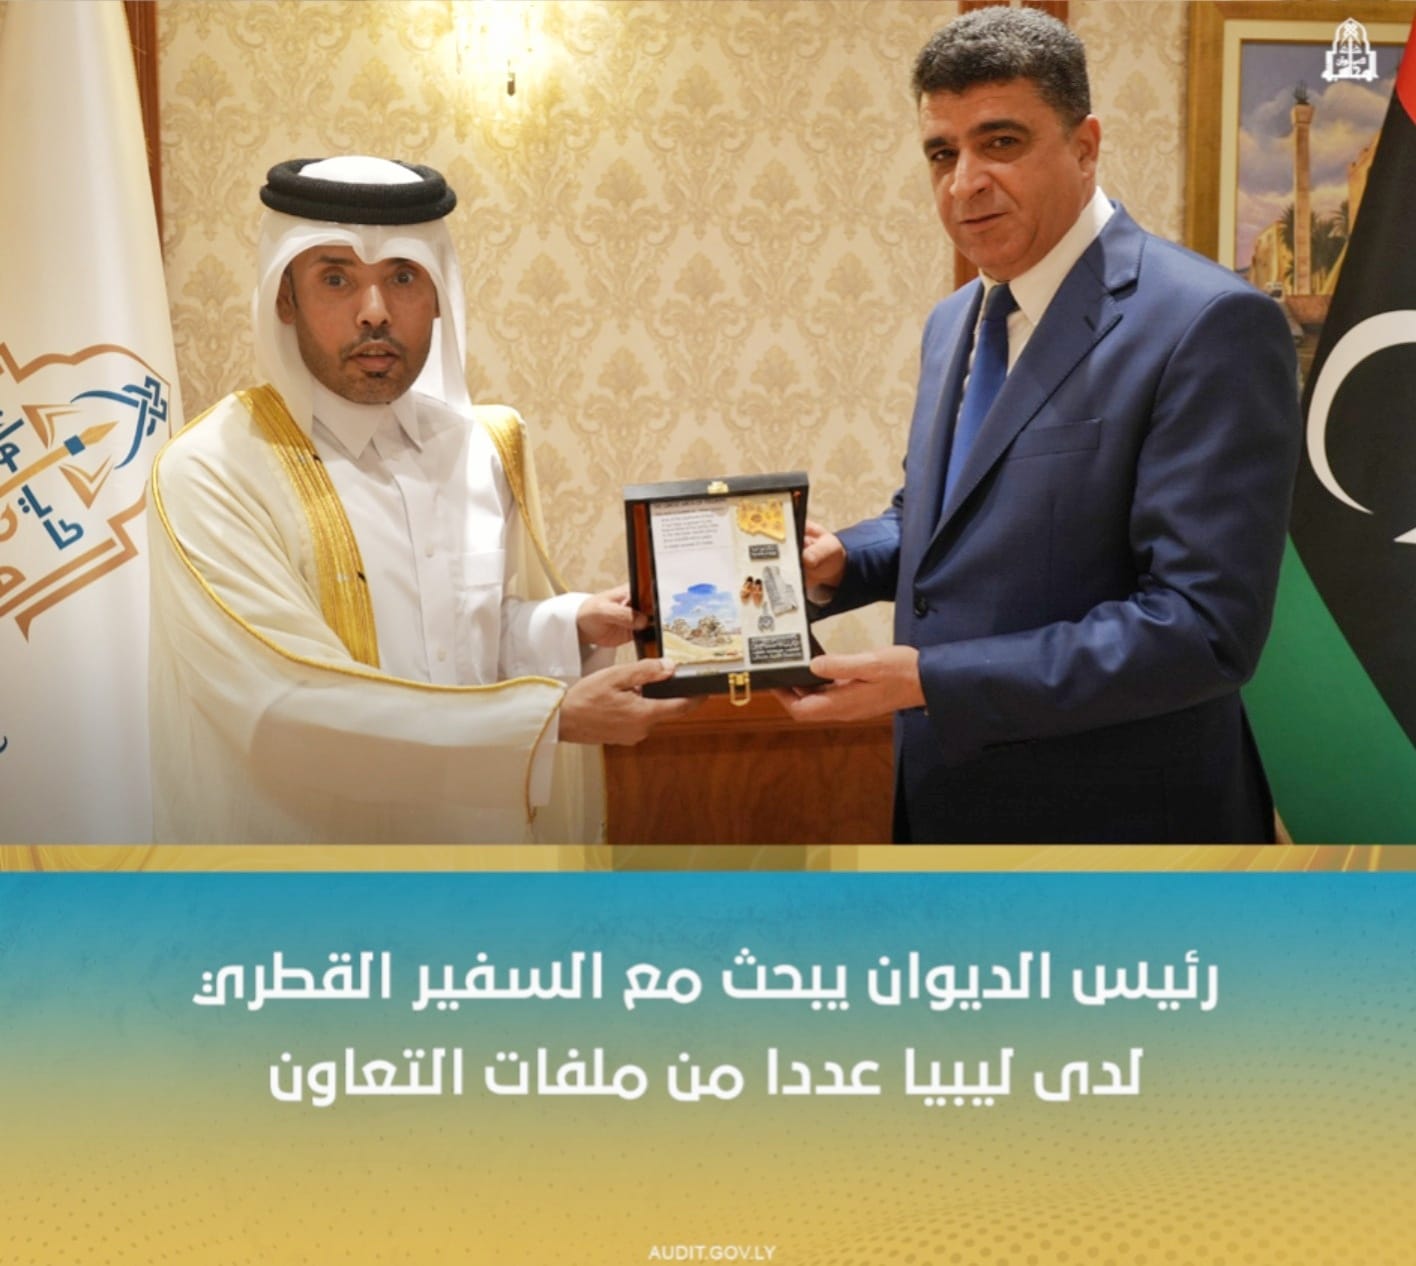 Shakshak discusses with the Qatari Ambassador to Libya joint cooperation and concluding an agreement to exchange experiences.